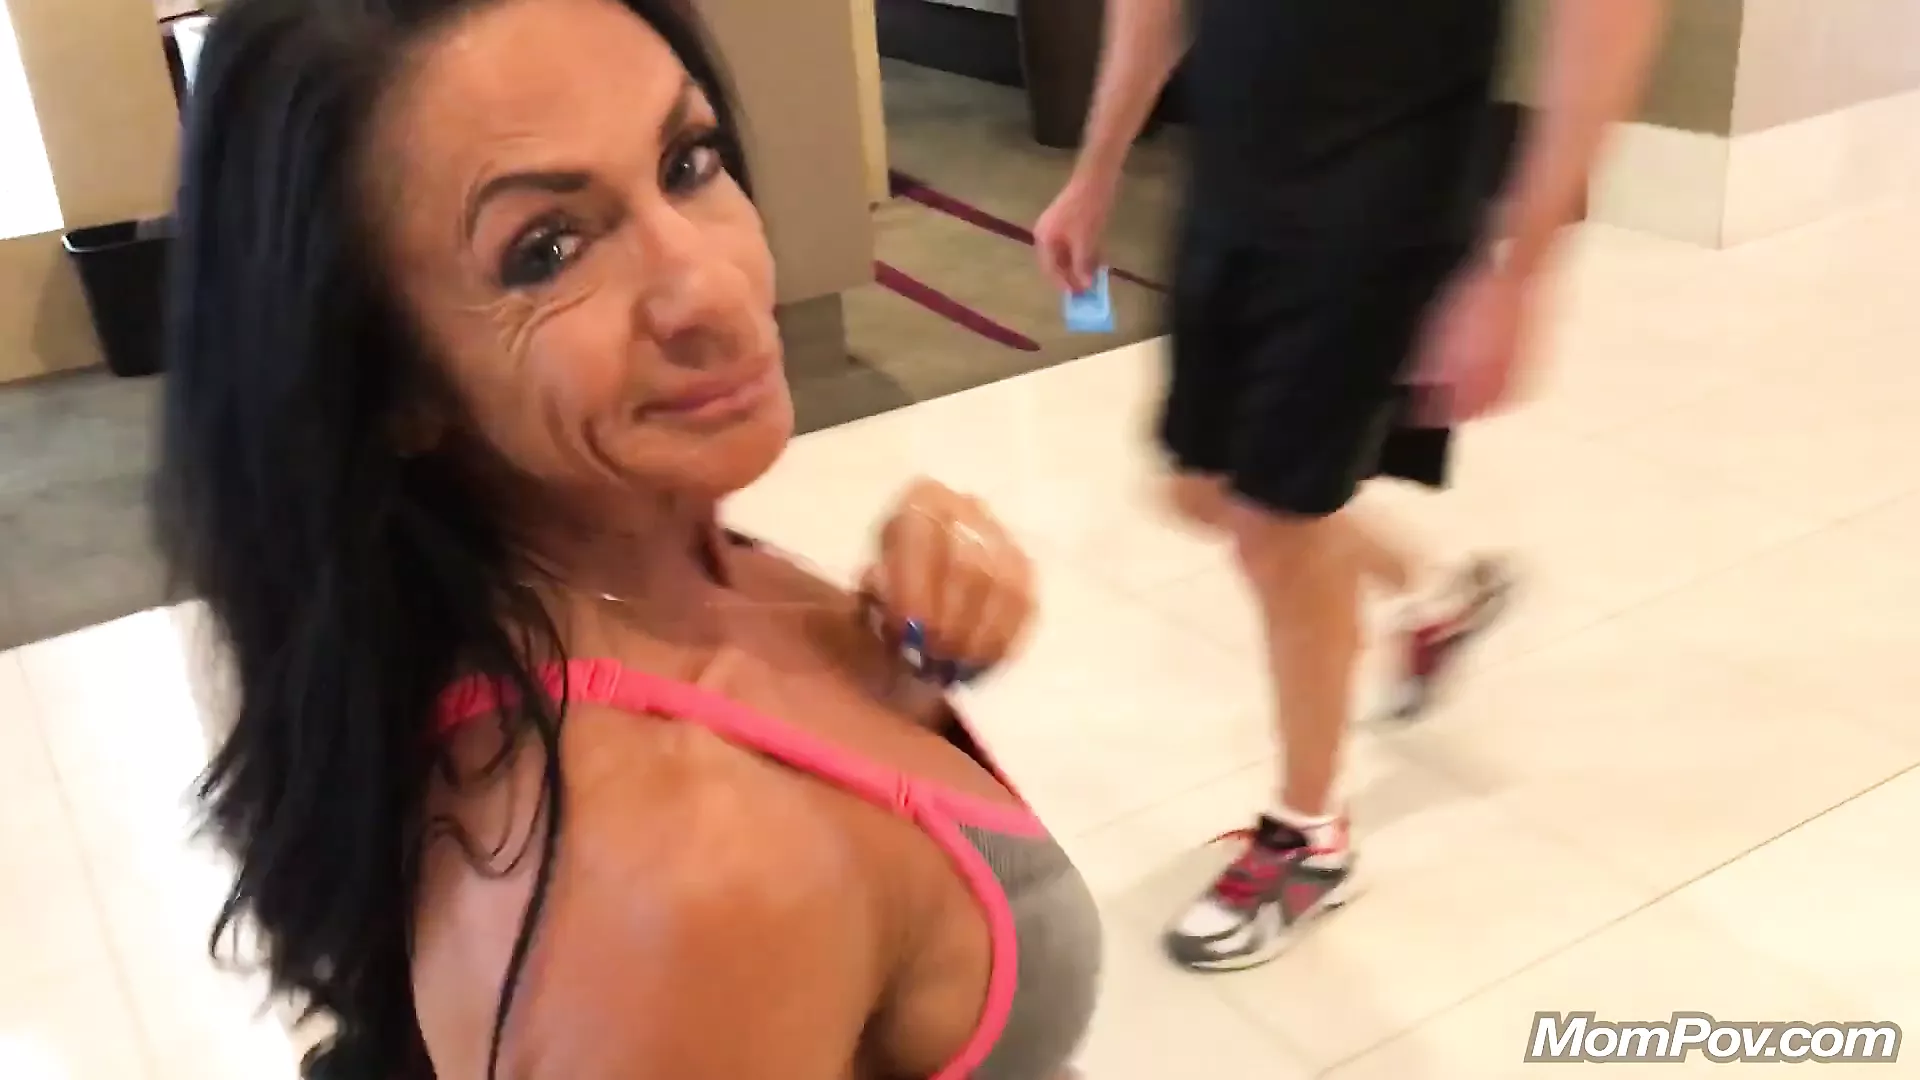 55 year old fitness coach